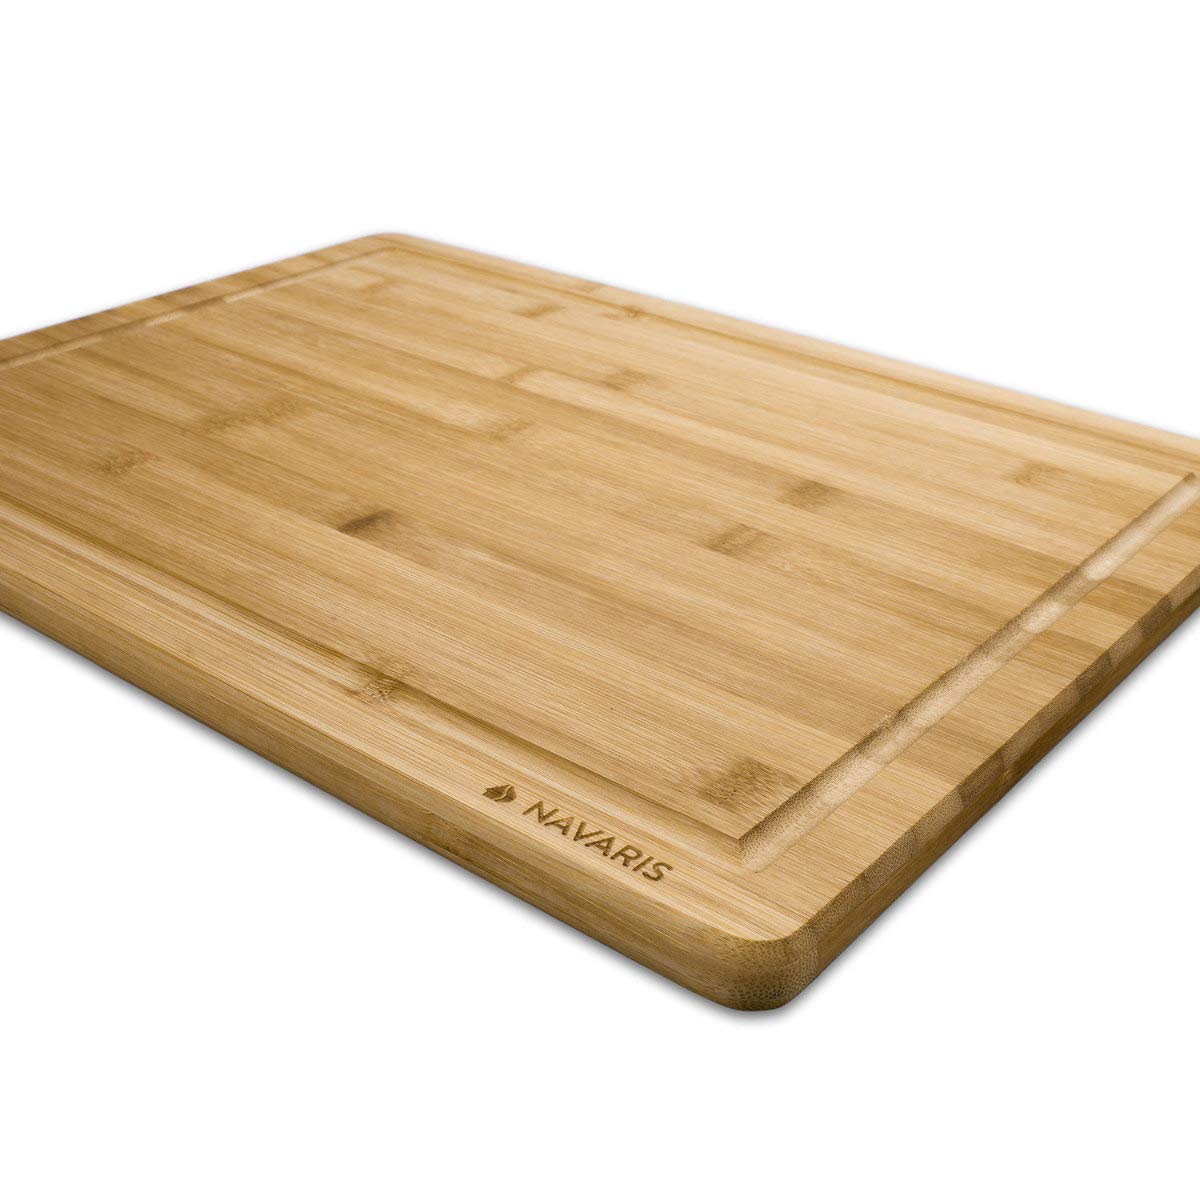 Navaris Wood Cutting Board - Large Natural Bamboo Wooden Chopping Board for Kitchen with Crumb and Juice Groove for Food Prep - Size L, 18 x 13 inches